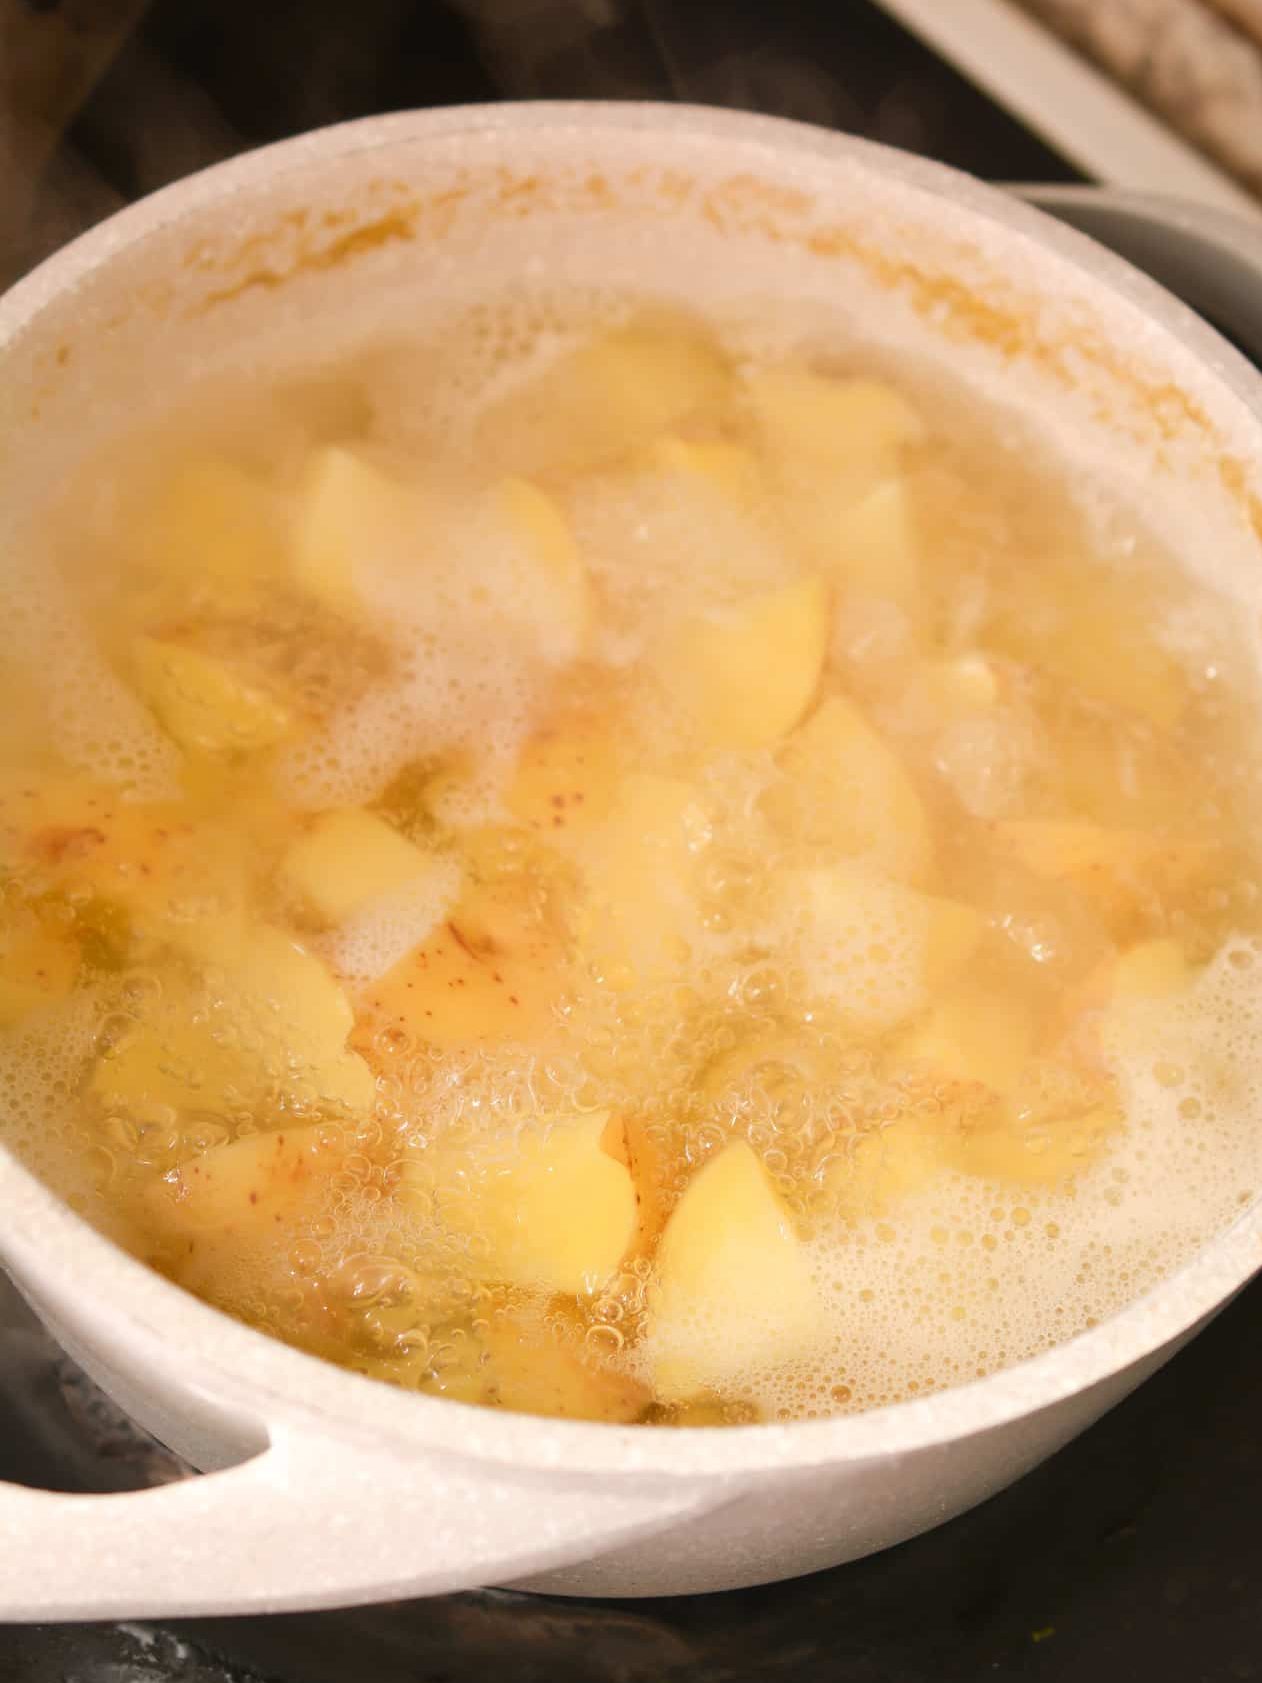 Start by boiling the potatoes